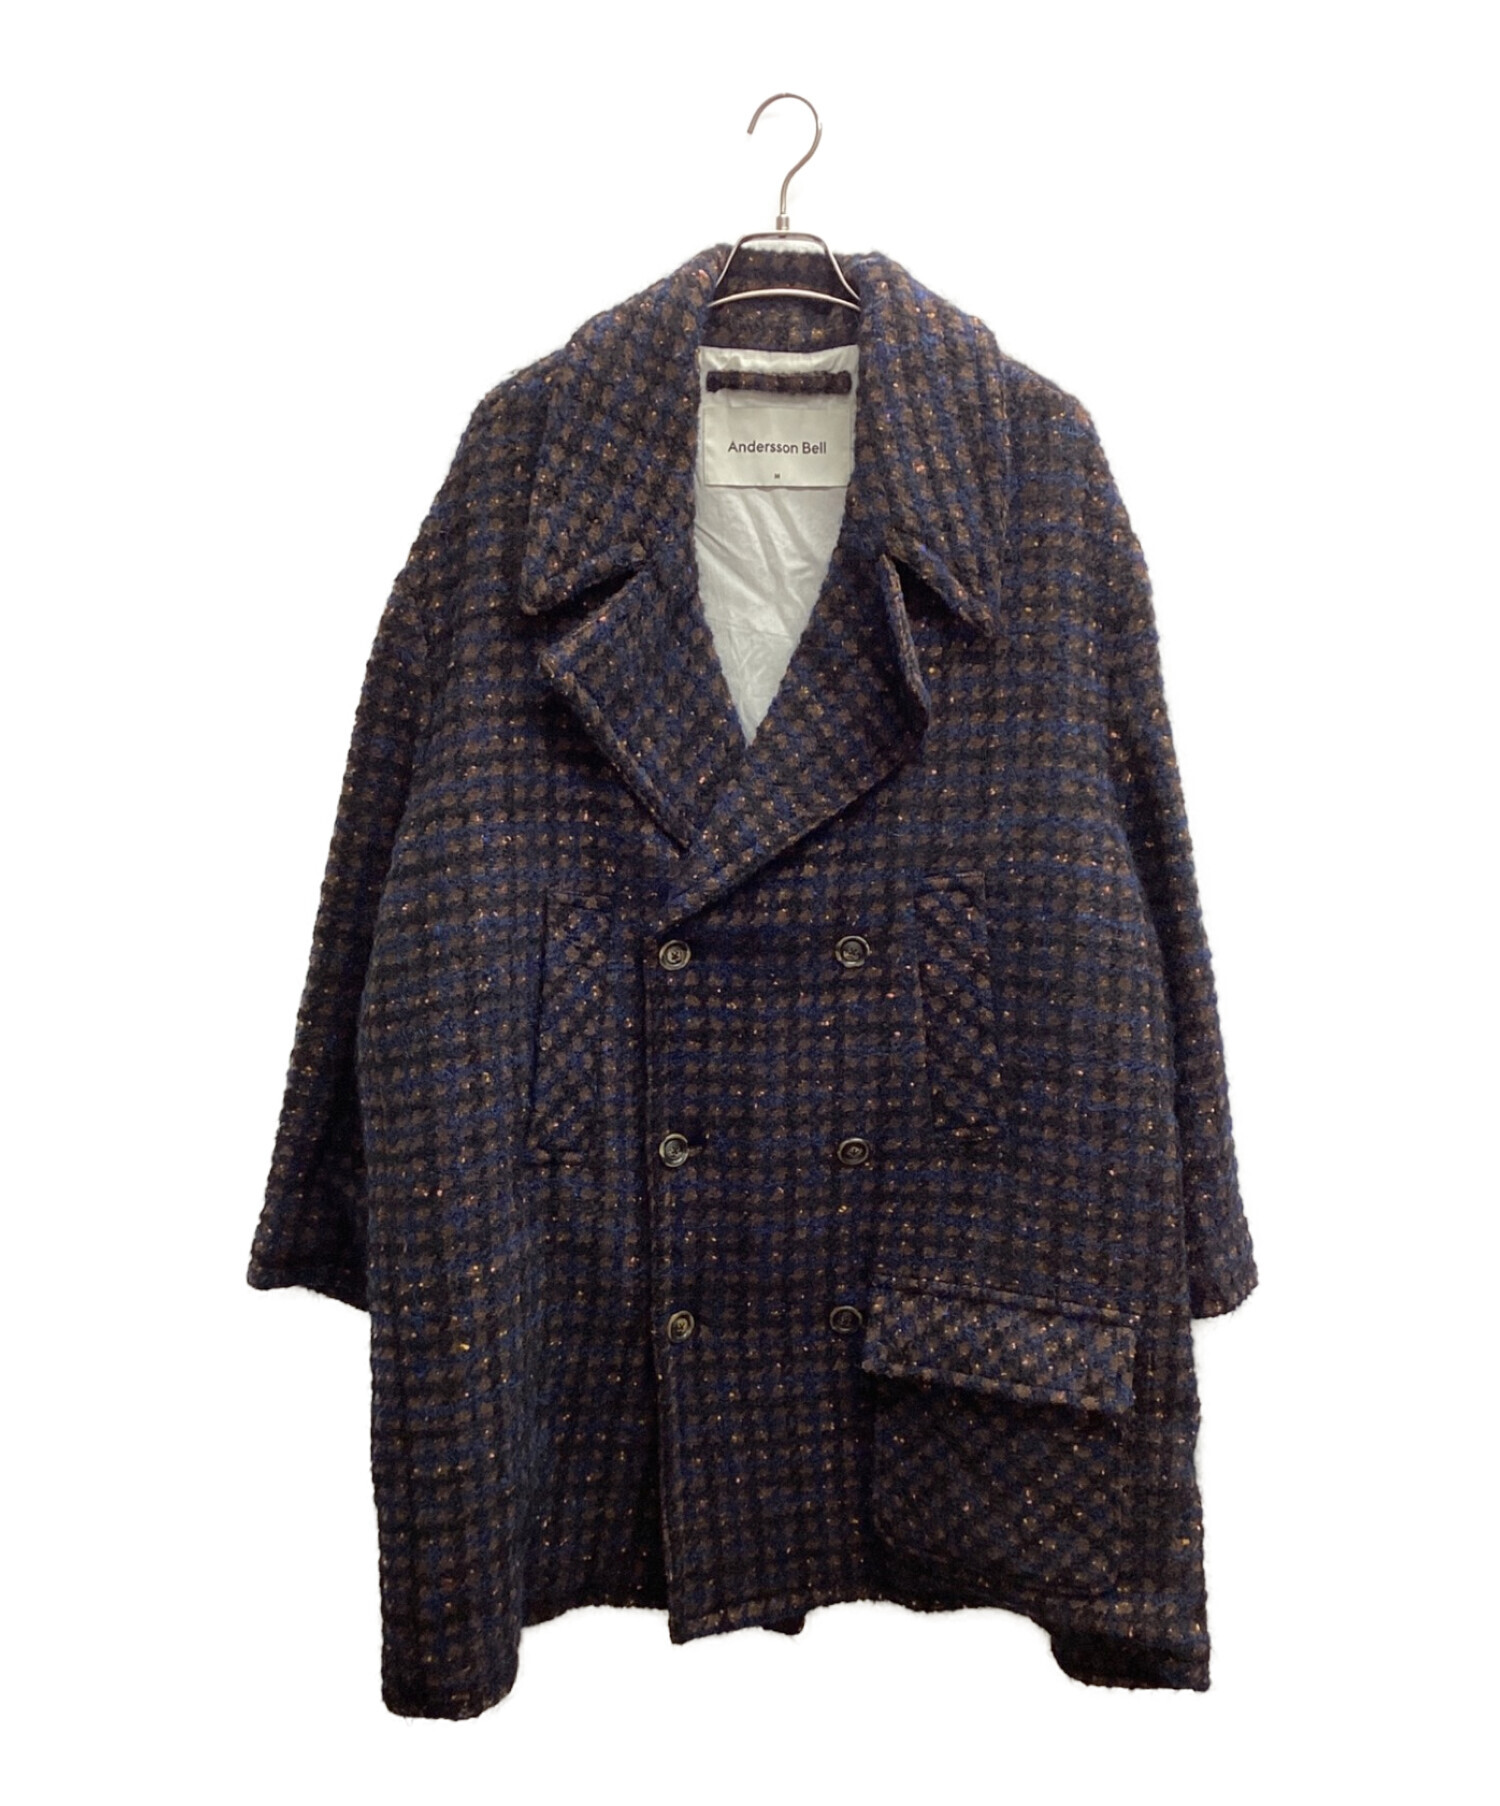 andersson bell coat